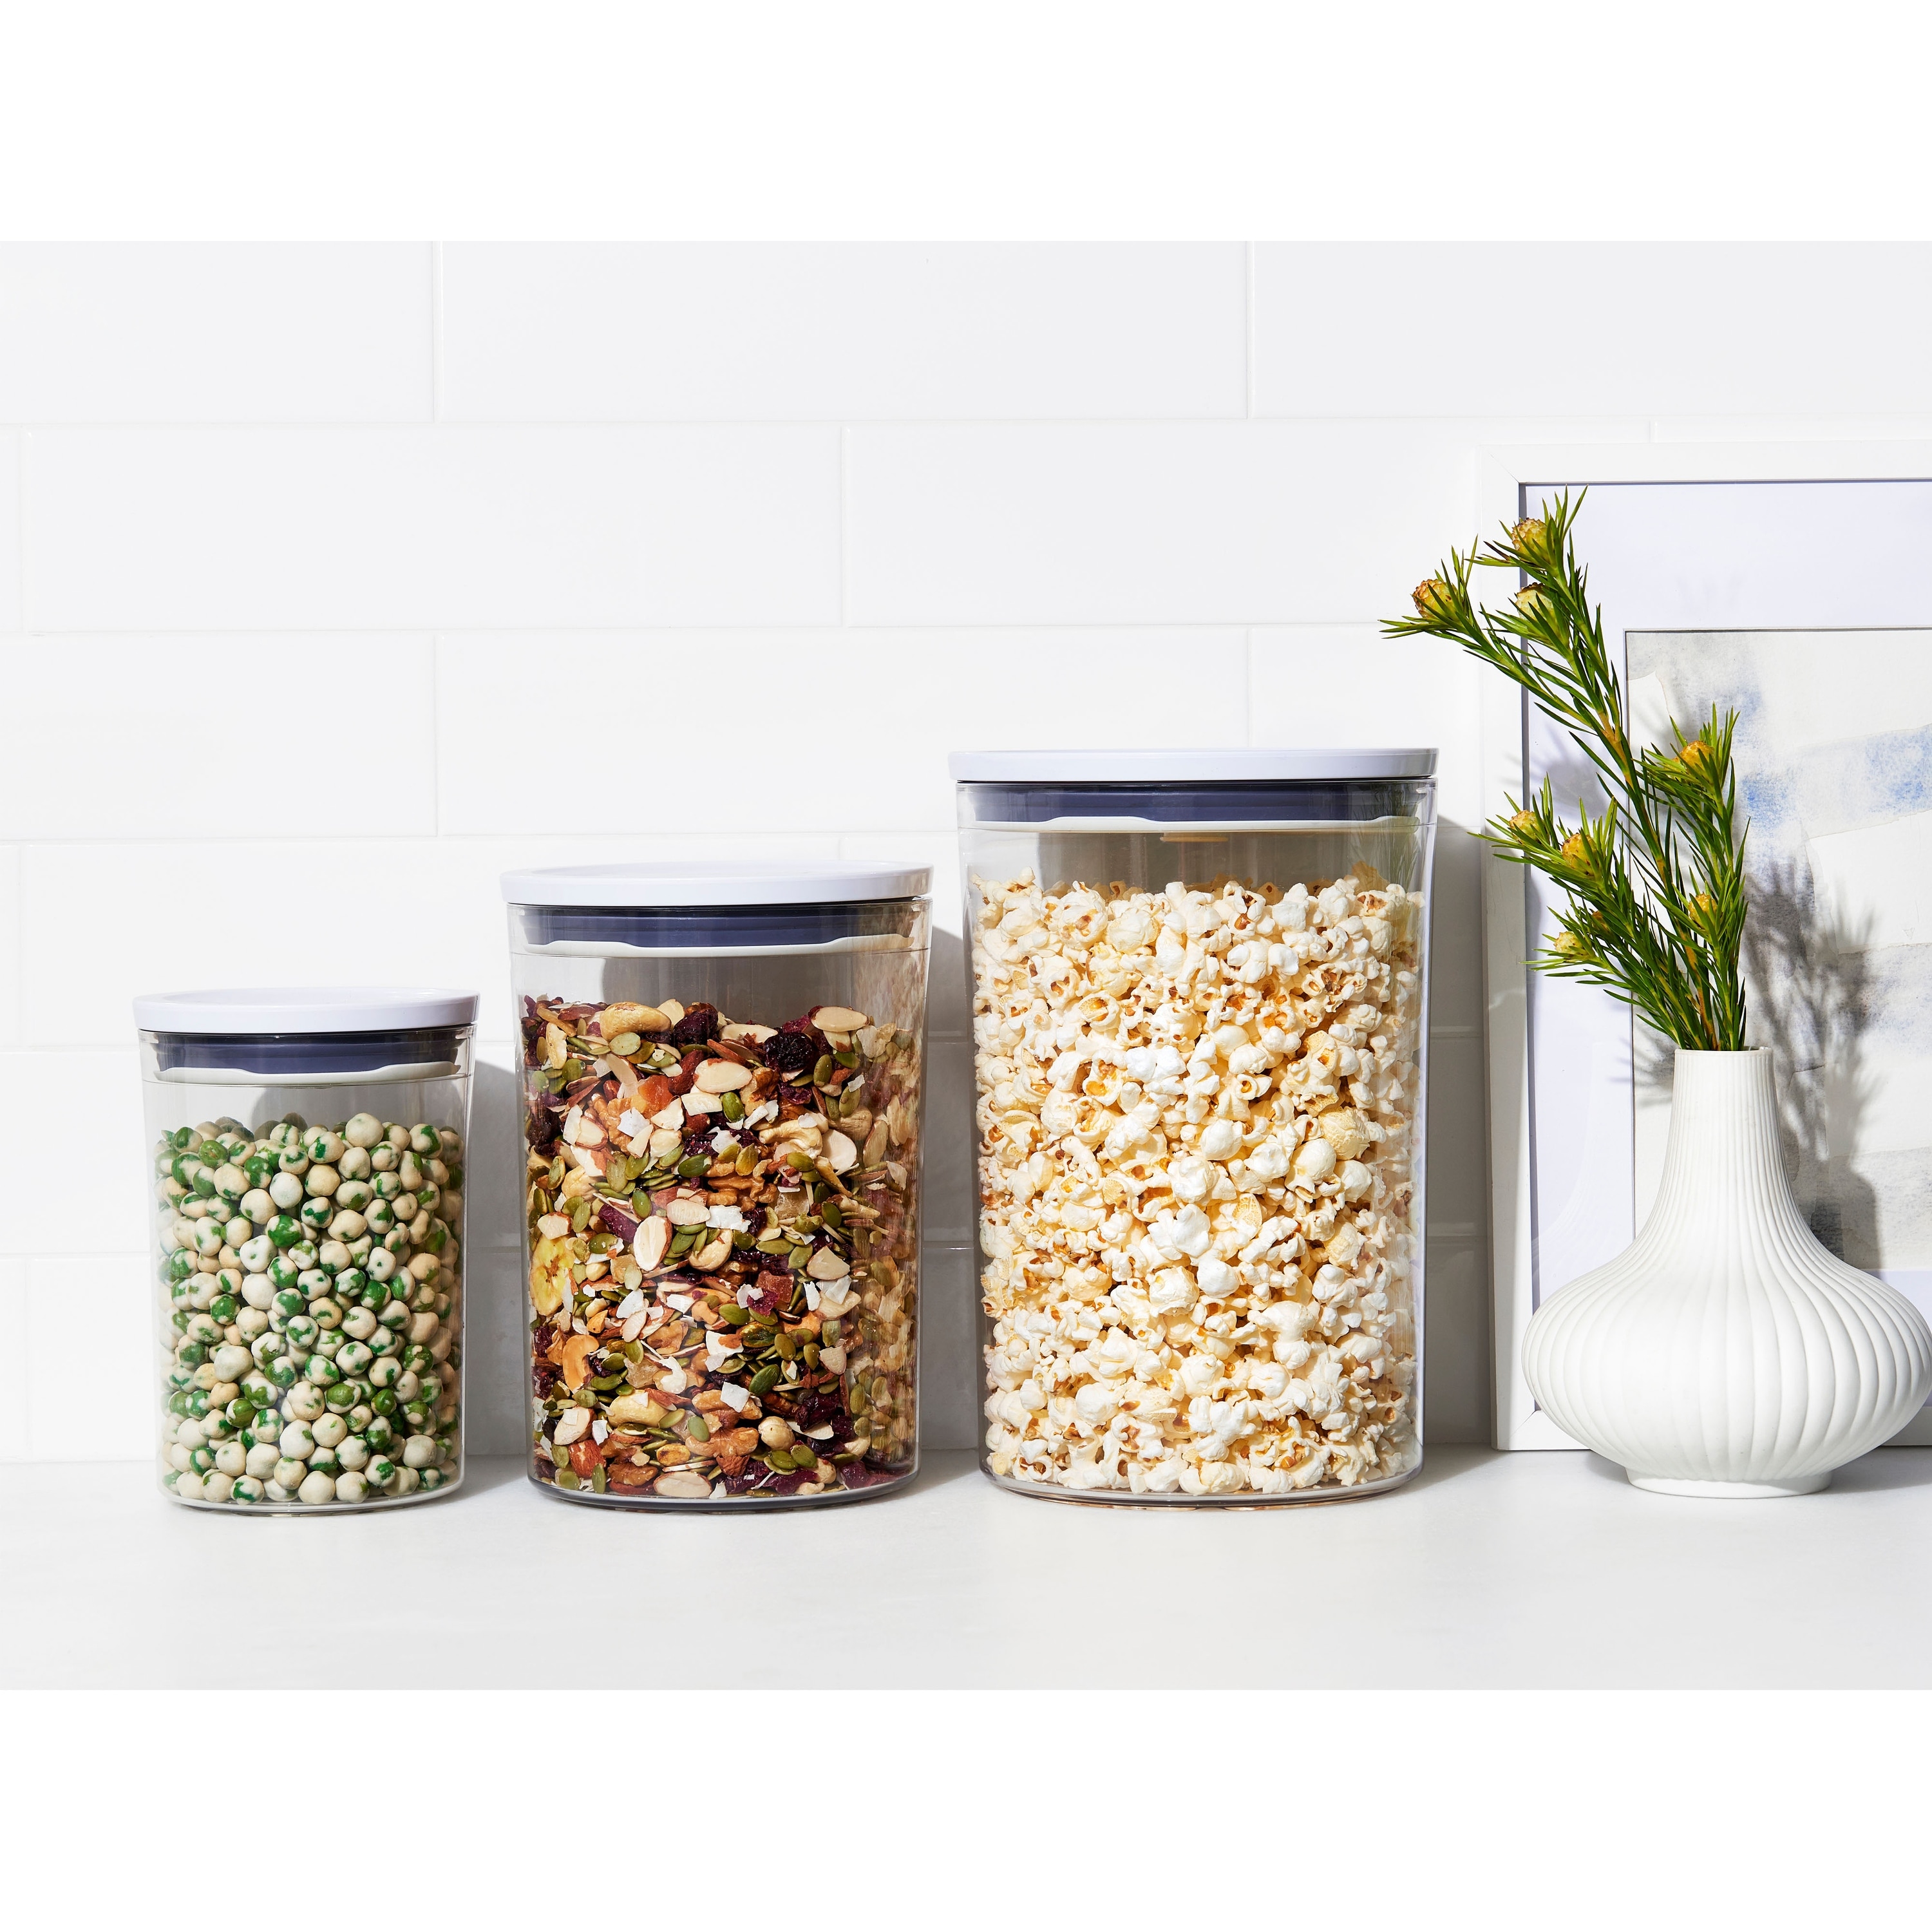 OXO Pop containers review: Easy-open storage set for hand